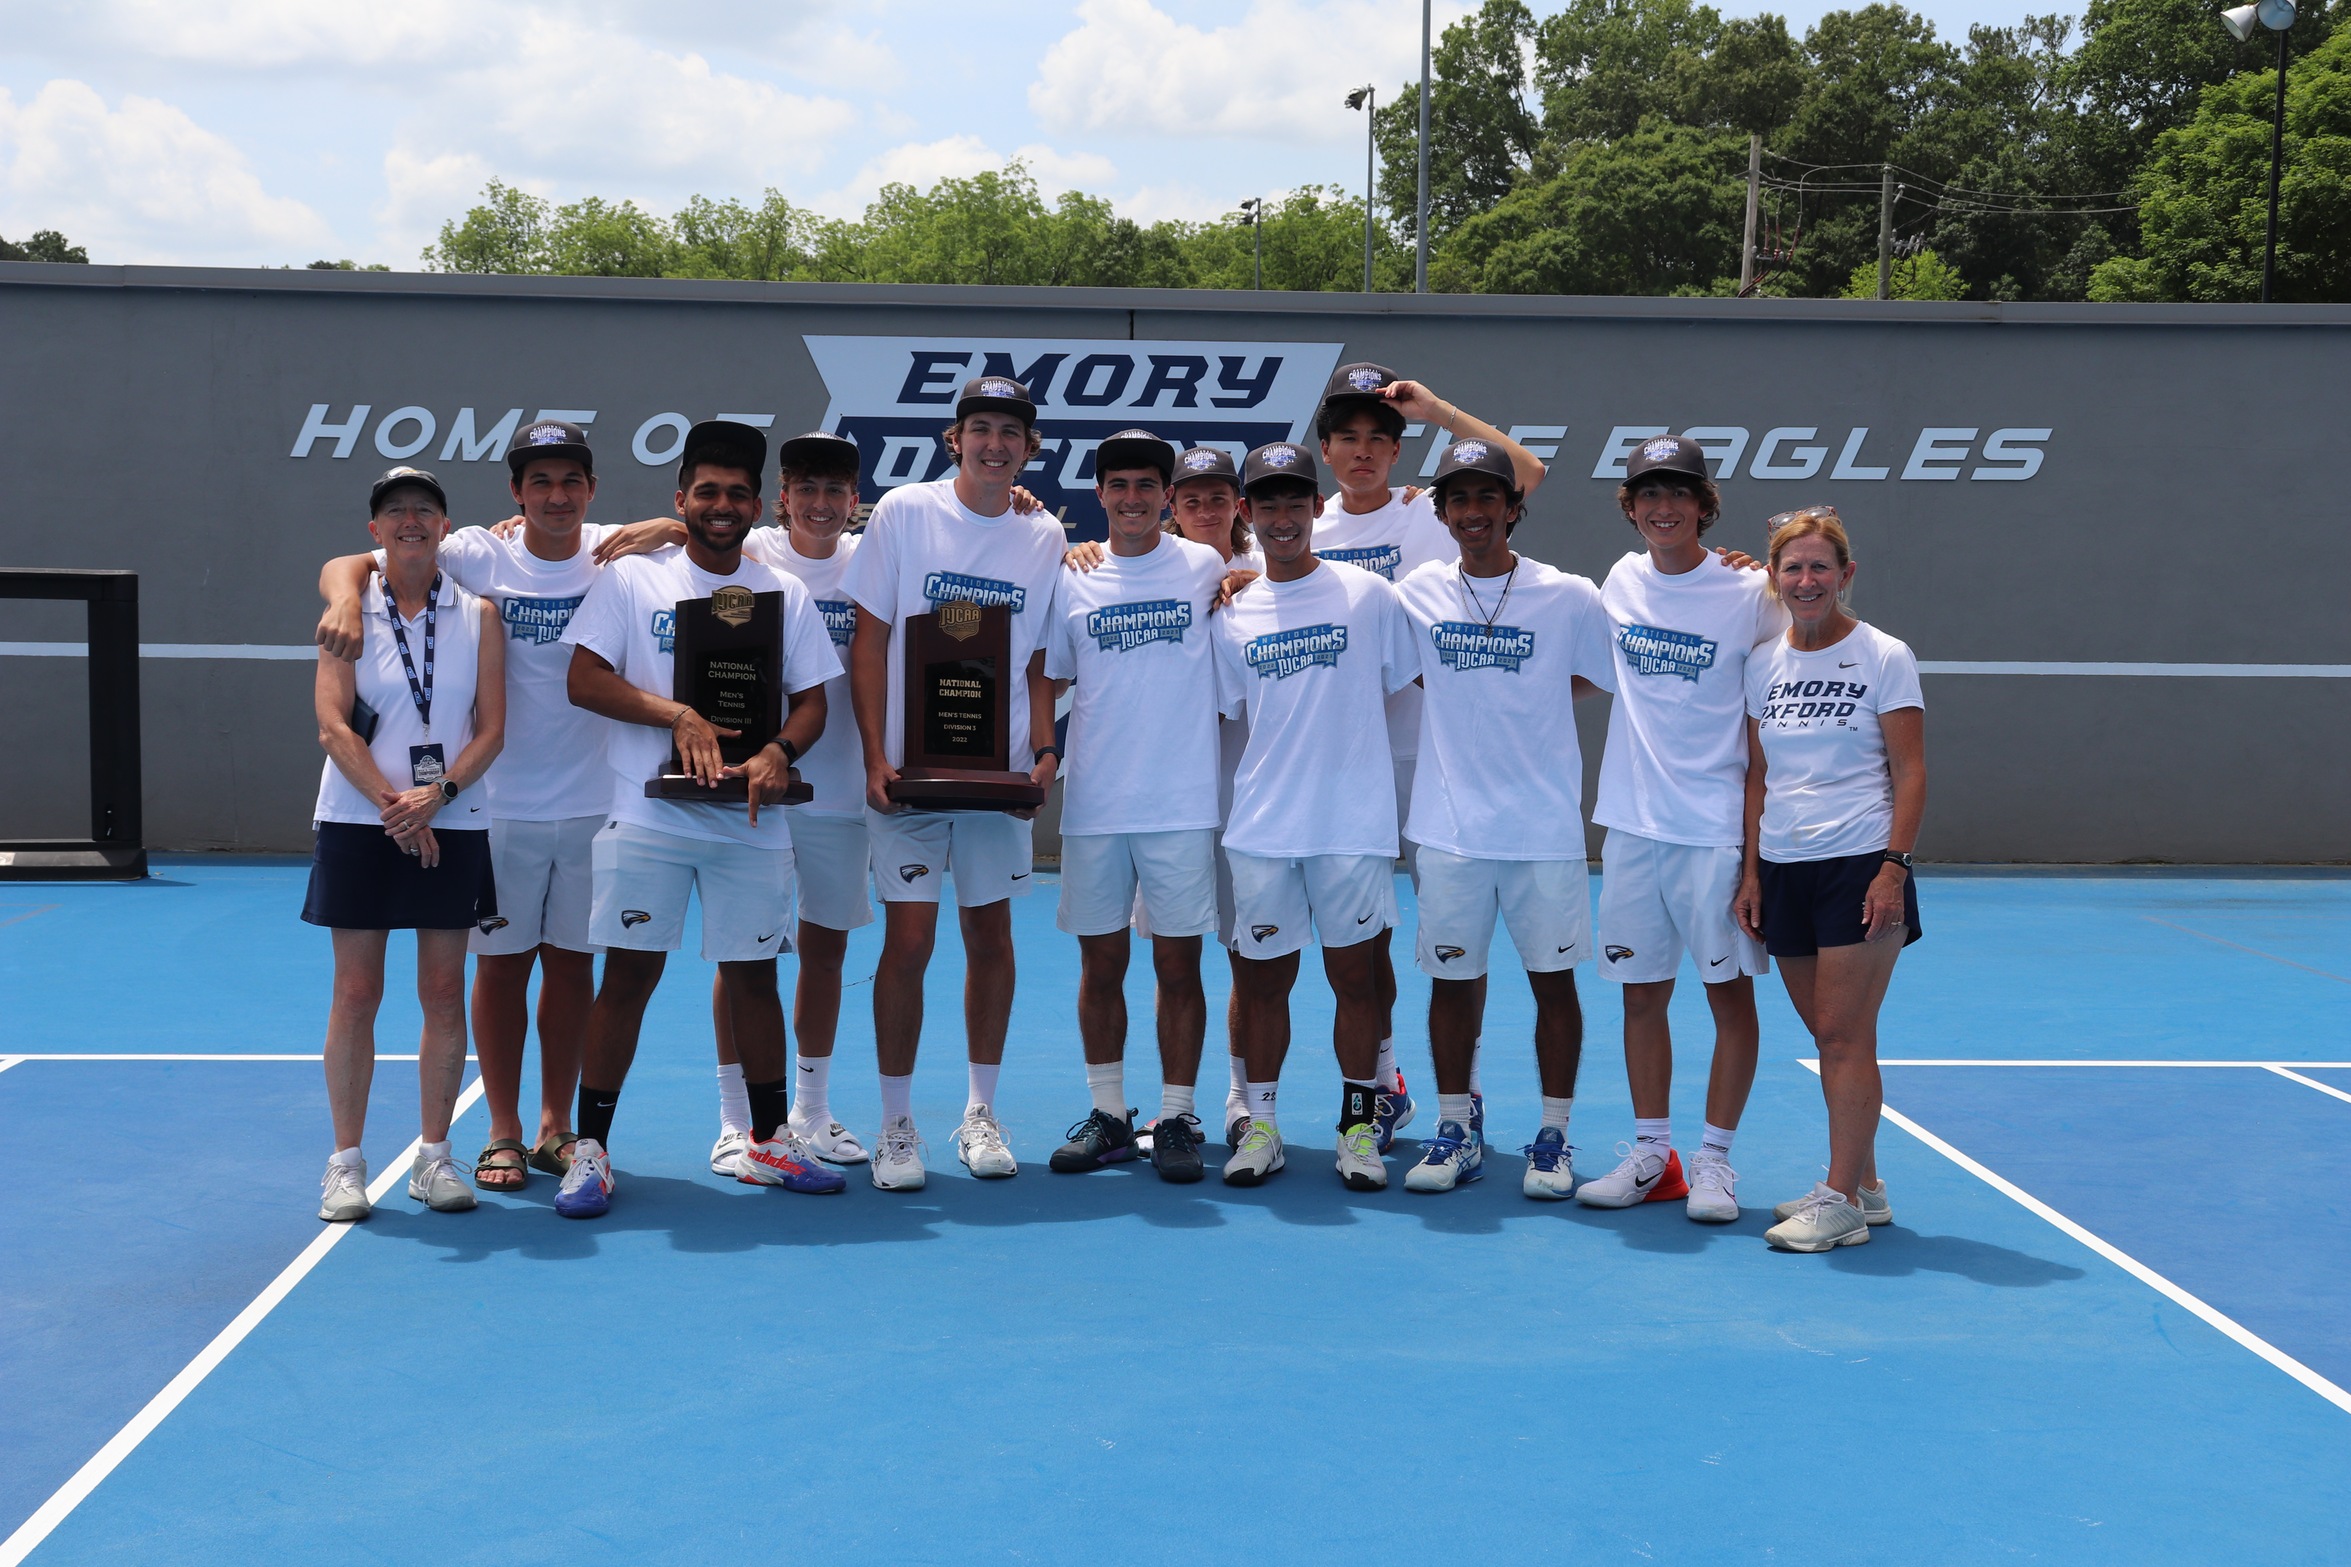 NATIONAL CHAMPIONS!!! Oxford Wins Seventh Consecutive National Title on Home Courts